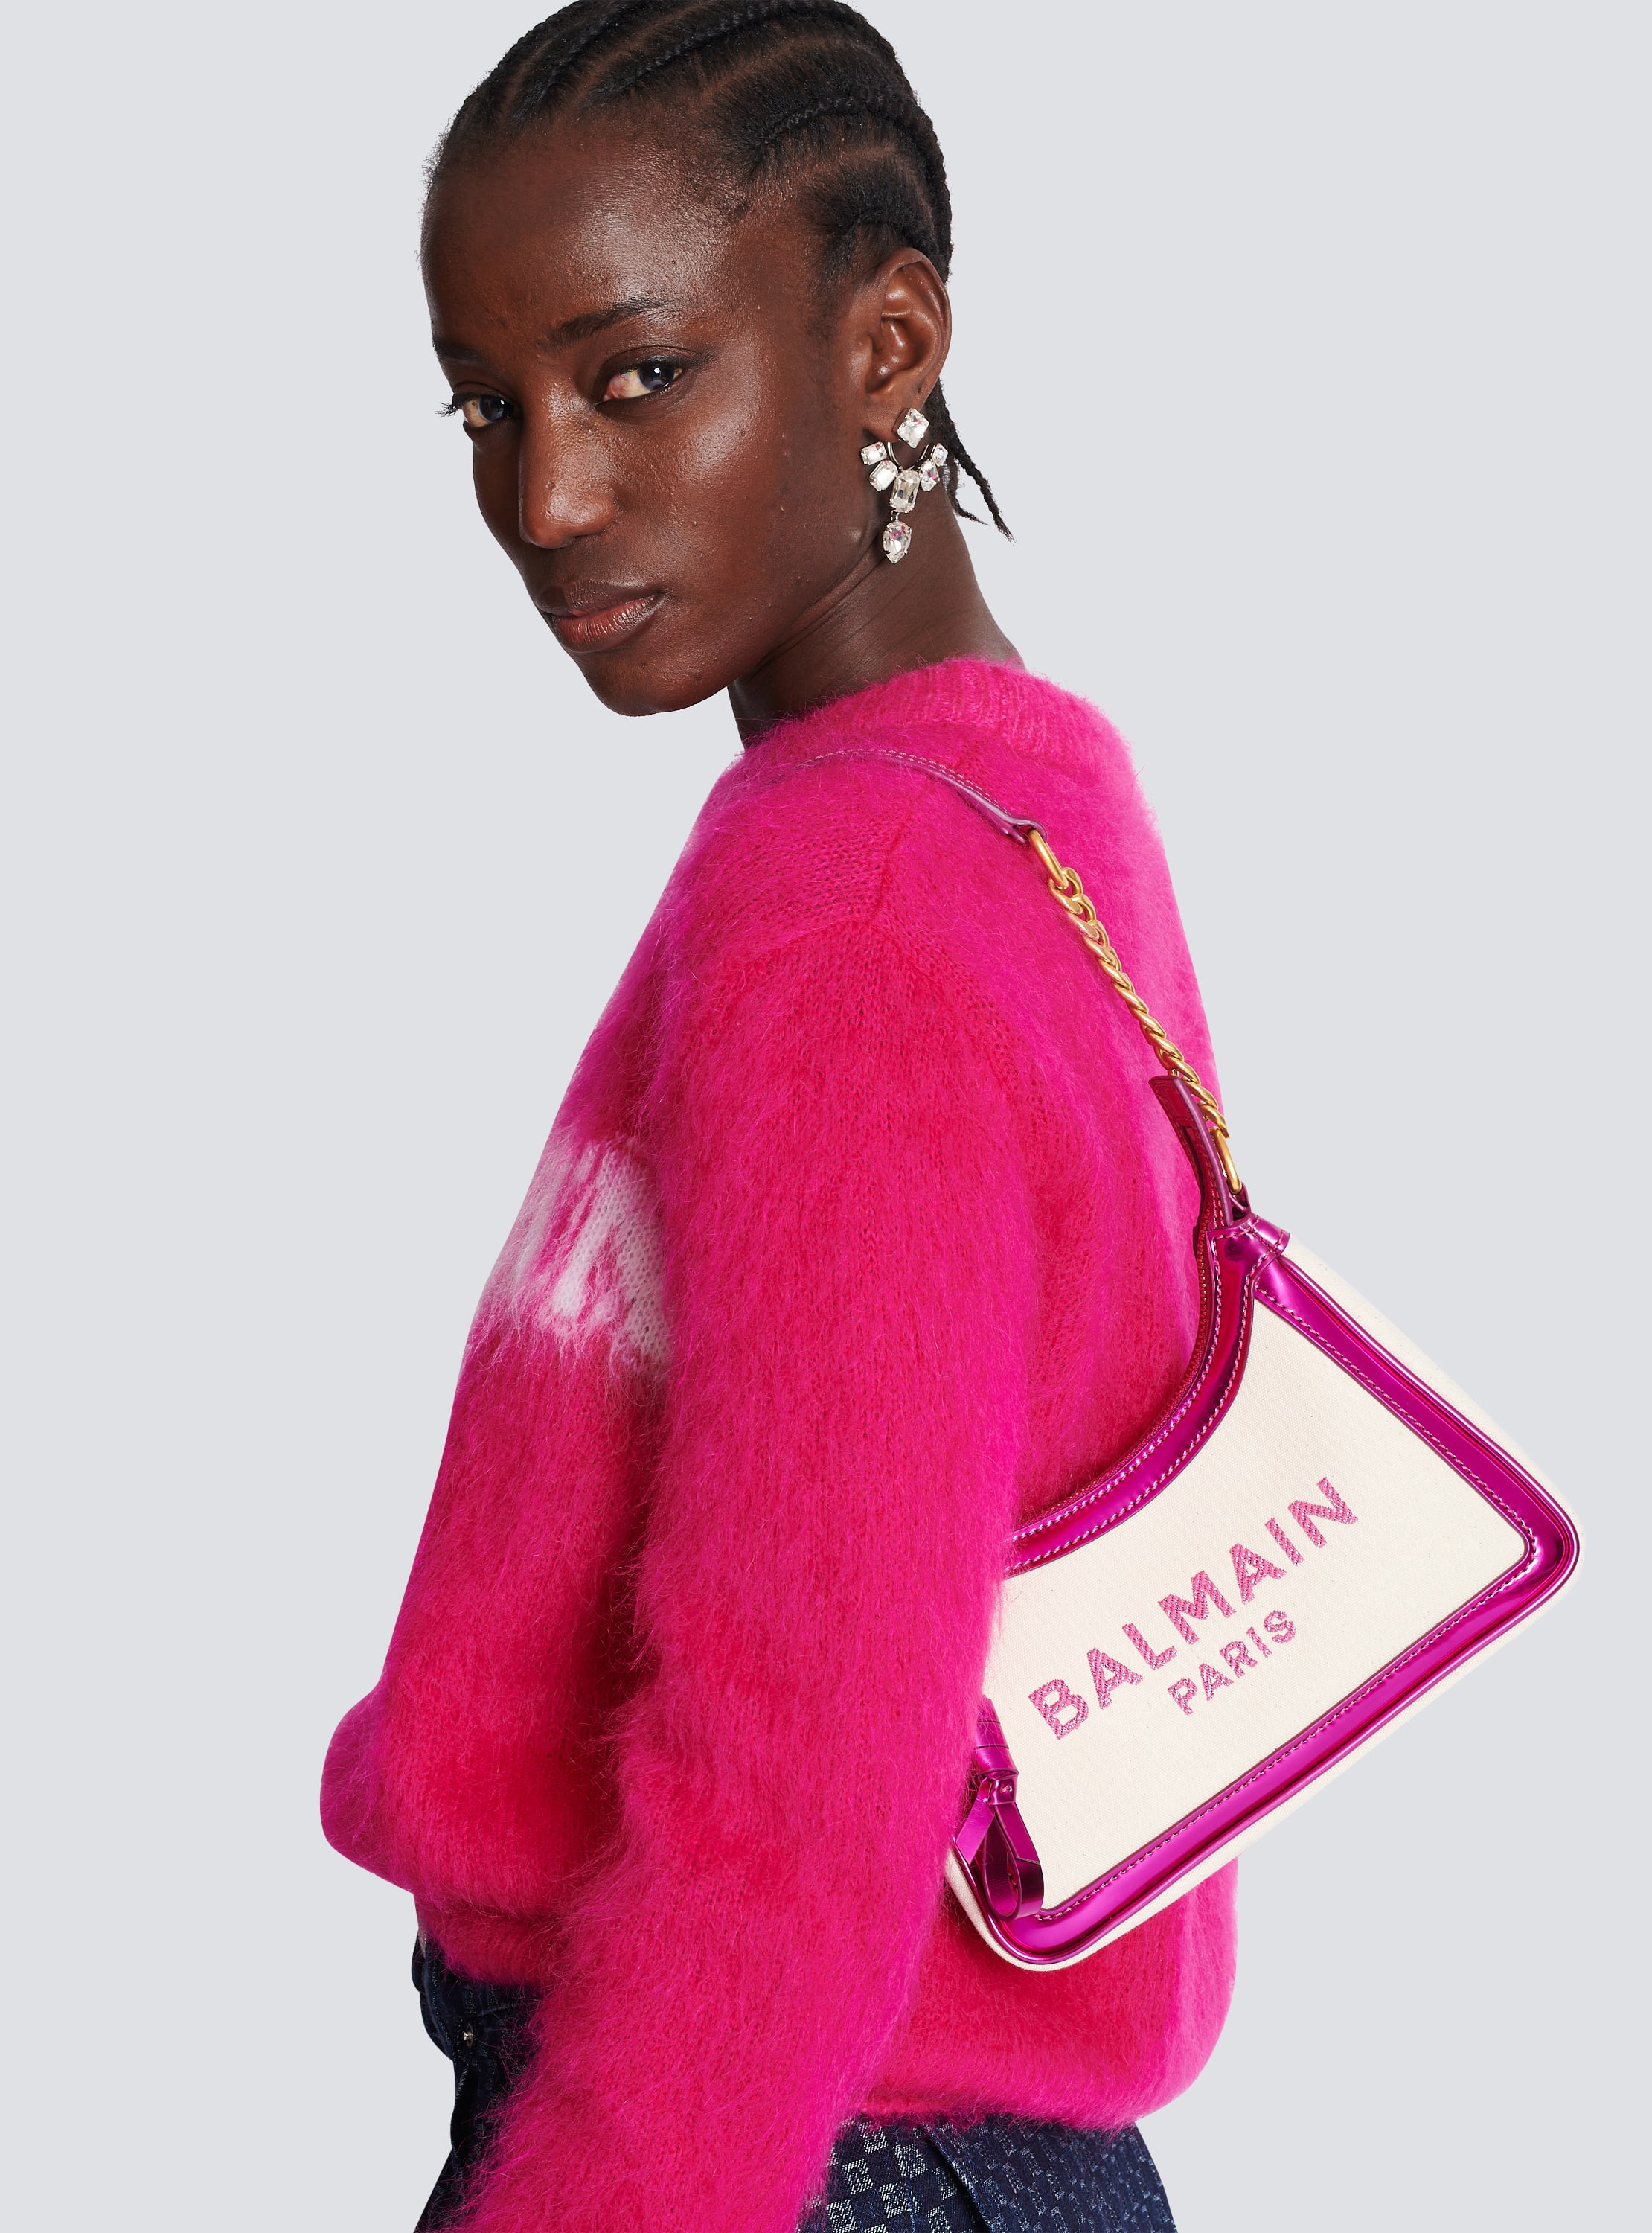 Balmain B-Army 26 Logo Canvas and Pink Leather Small Crossbody Bag – Queen  Bee of Beverly Hills